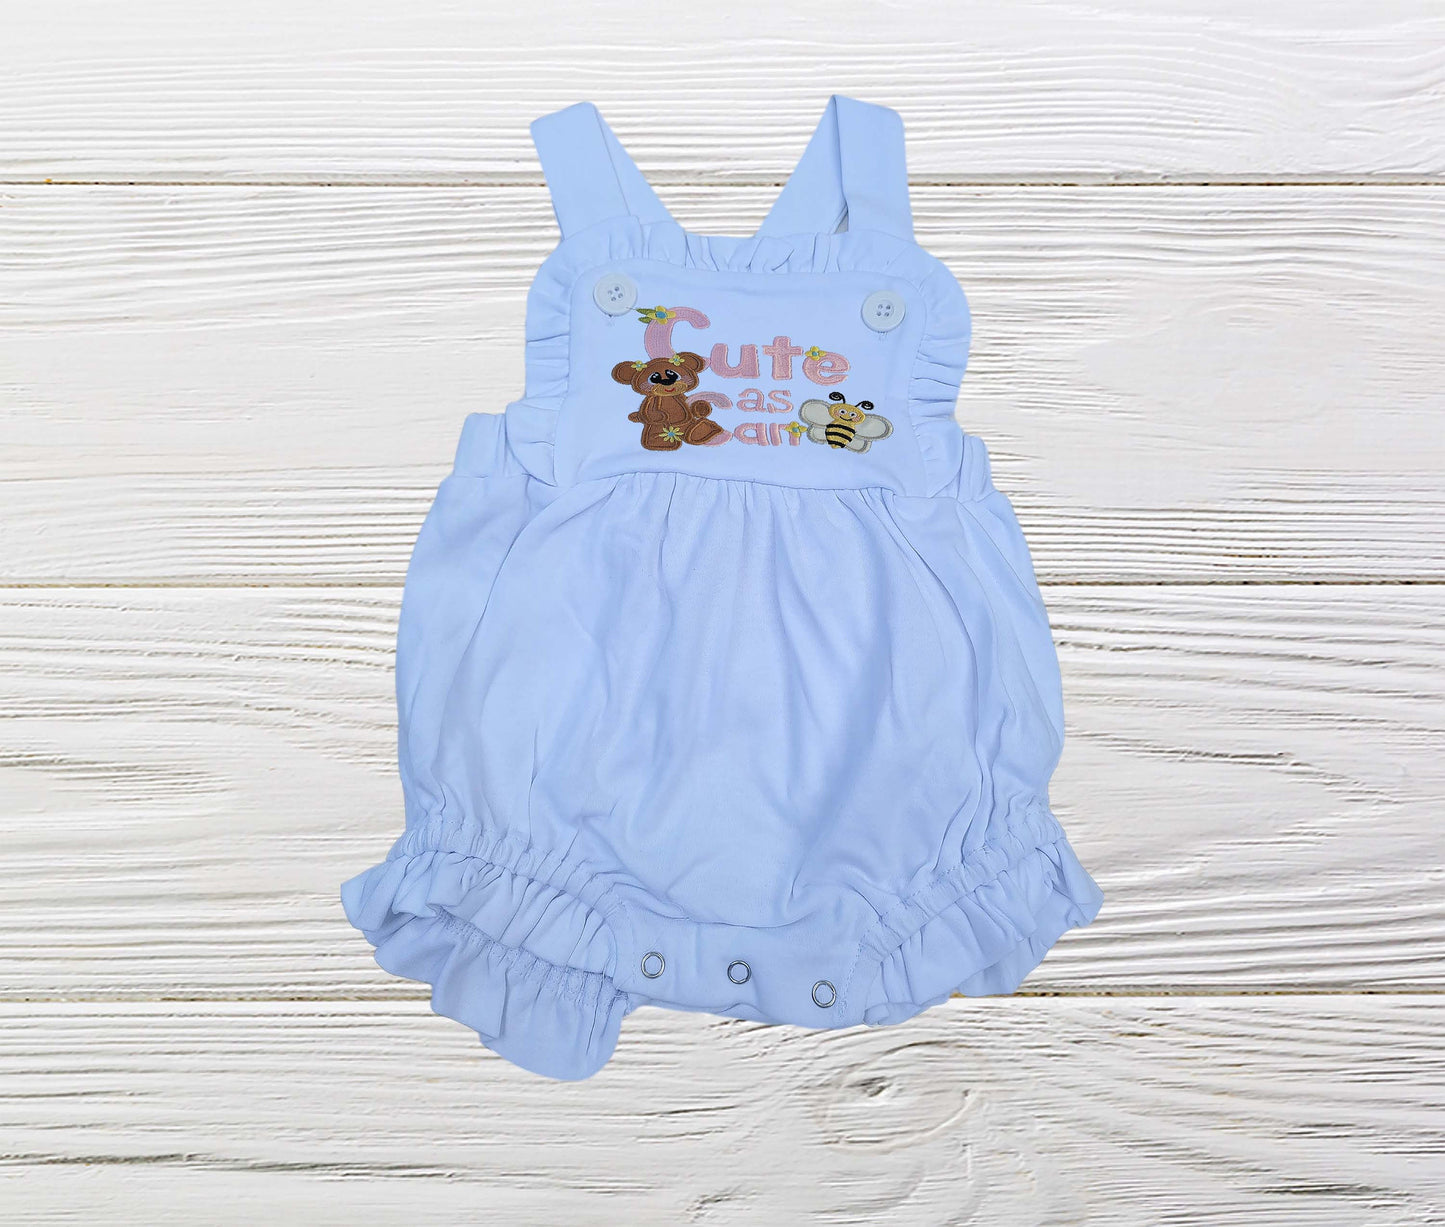 Baby bubble romper, Cute as can Bee romper,  Baby outfit, Cross backed sunsuit